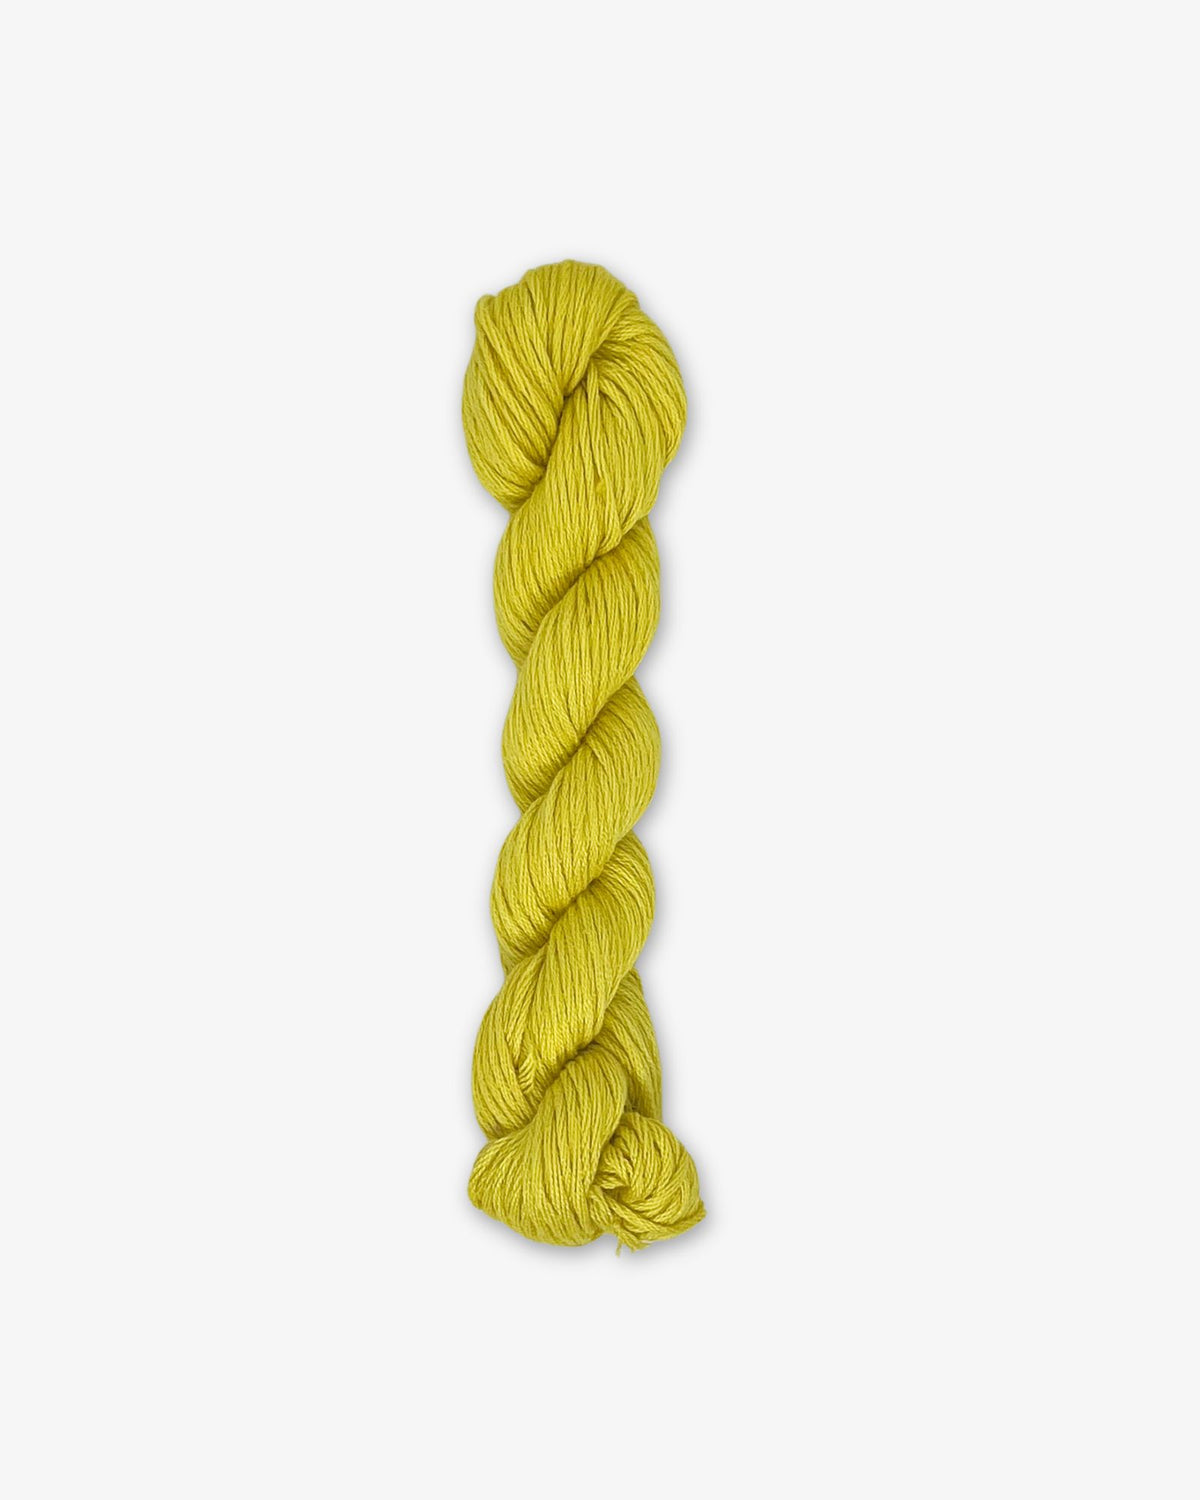 Six-Strand Cotton Threads by TATTER